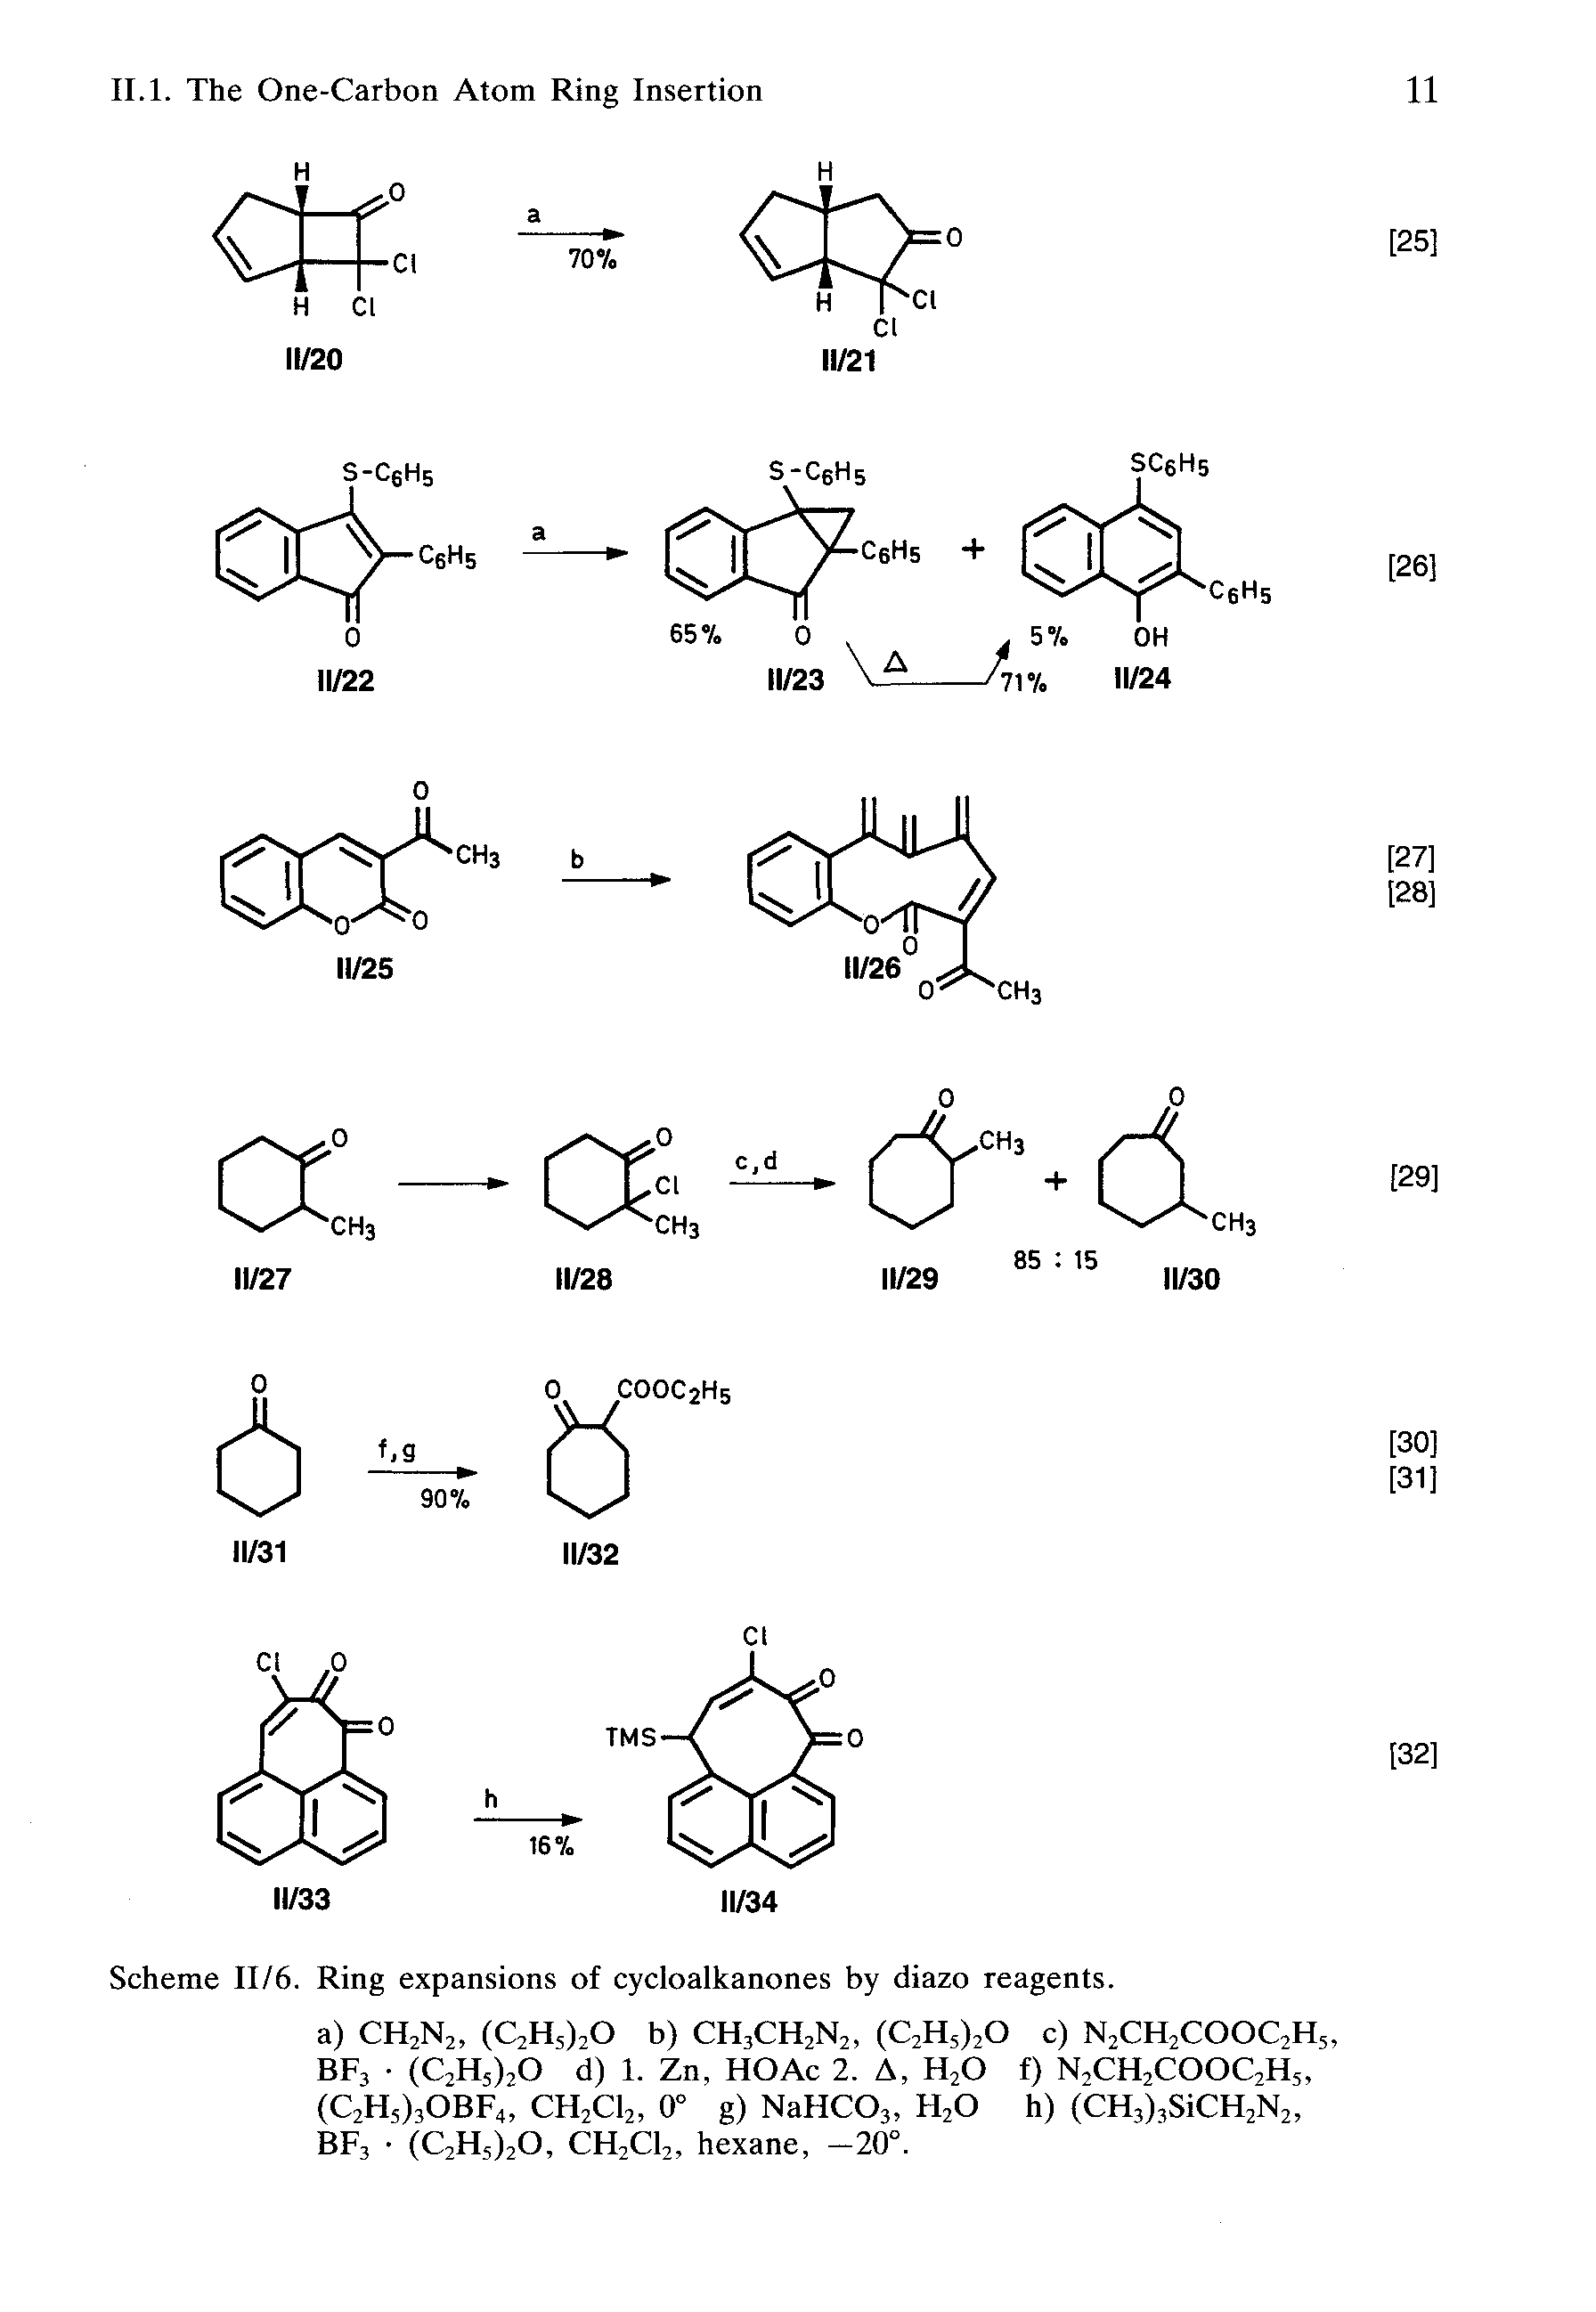 Scheme II/6. Ring expansions of cycloalkanones by diazo reagents.